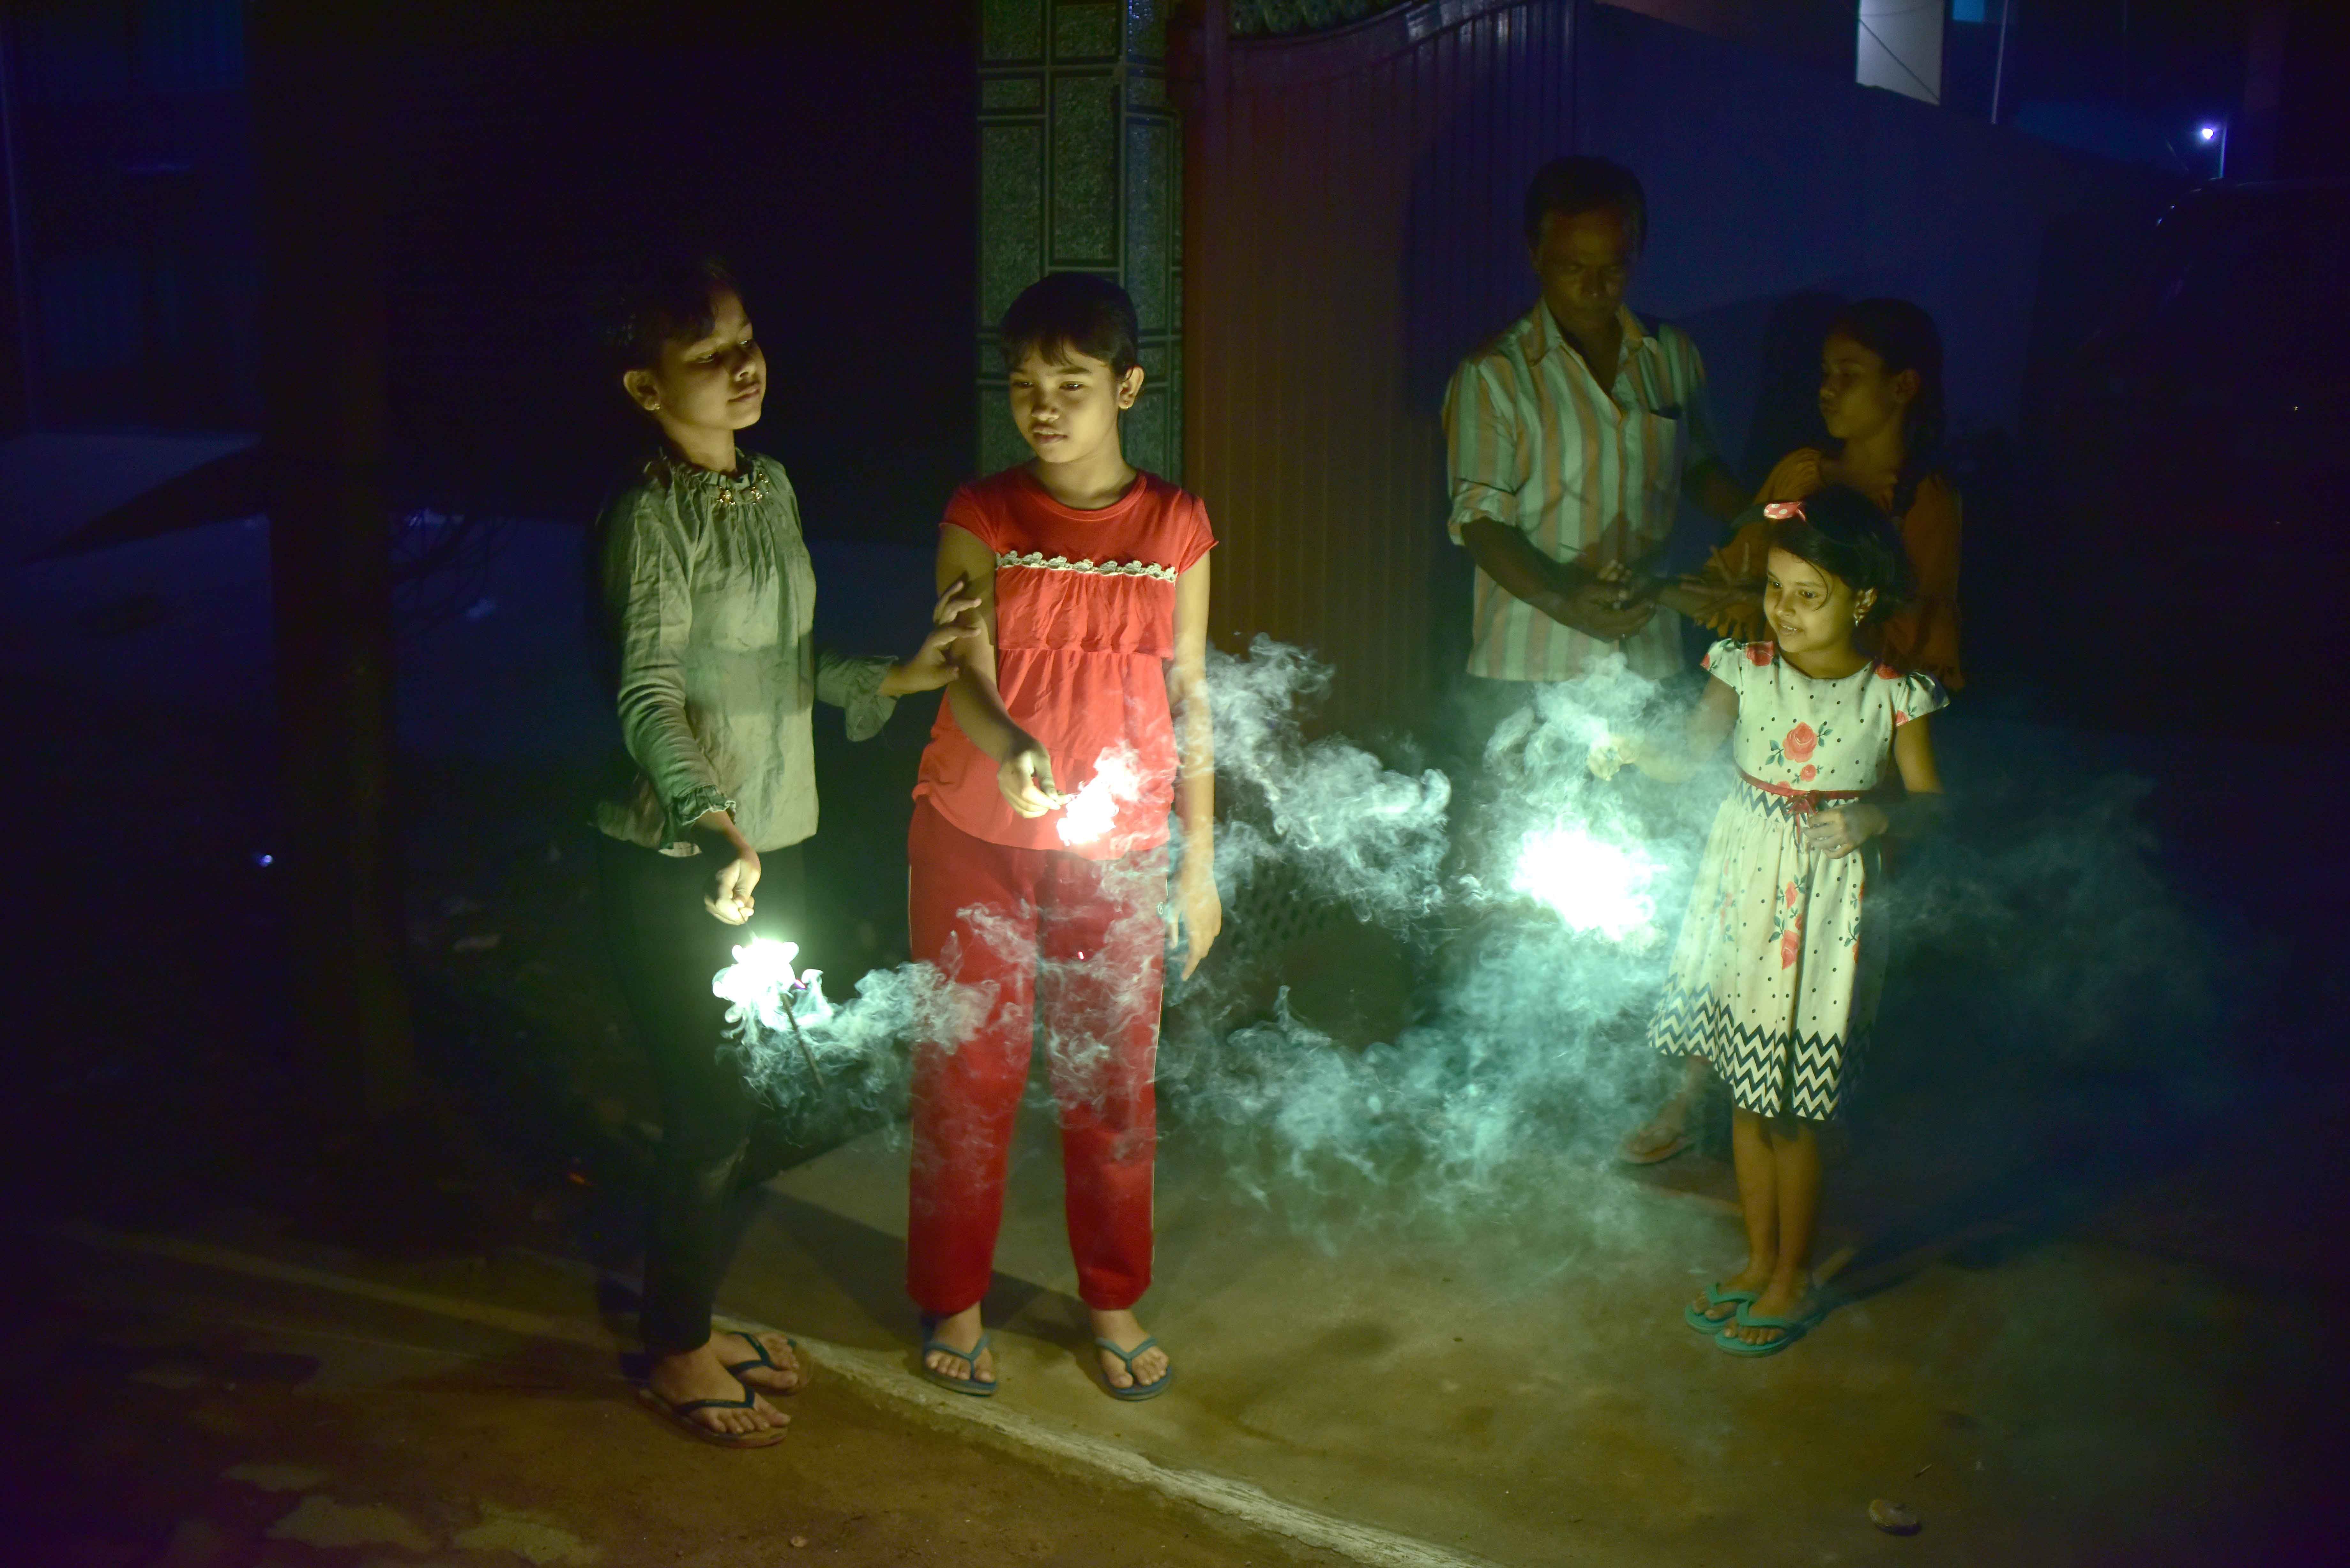 Girls holds sparklers during Diwali, the Hindu festival of lights in Nagaon District of Assam ,india